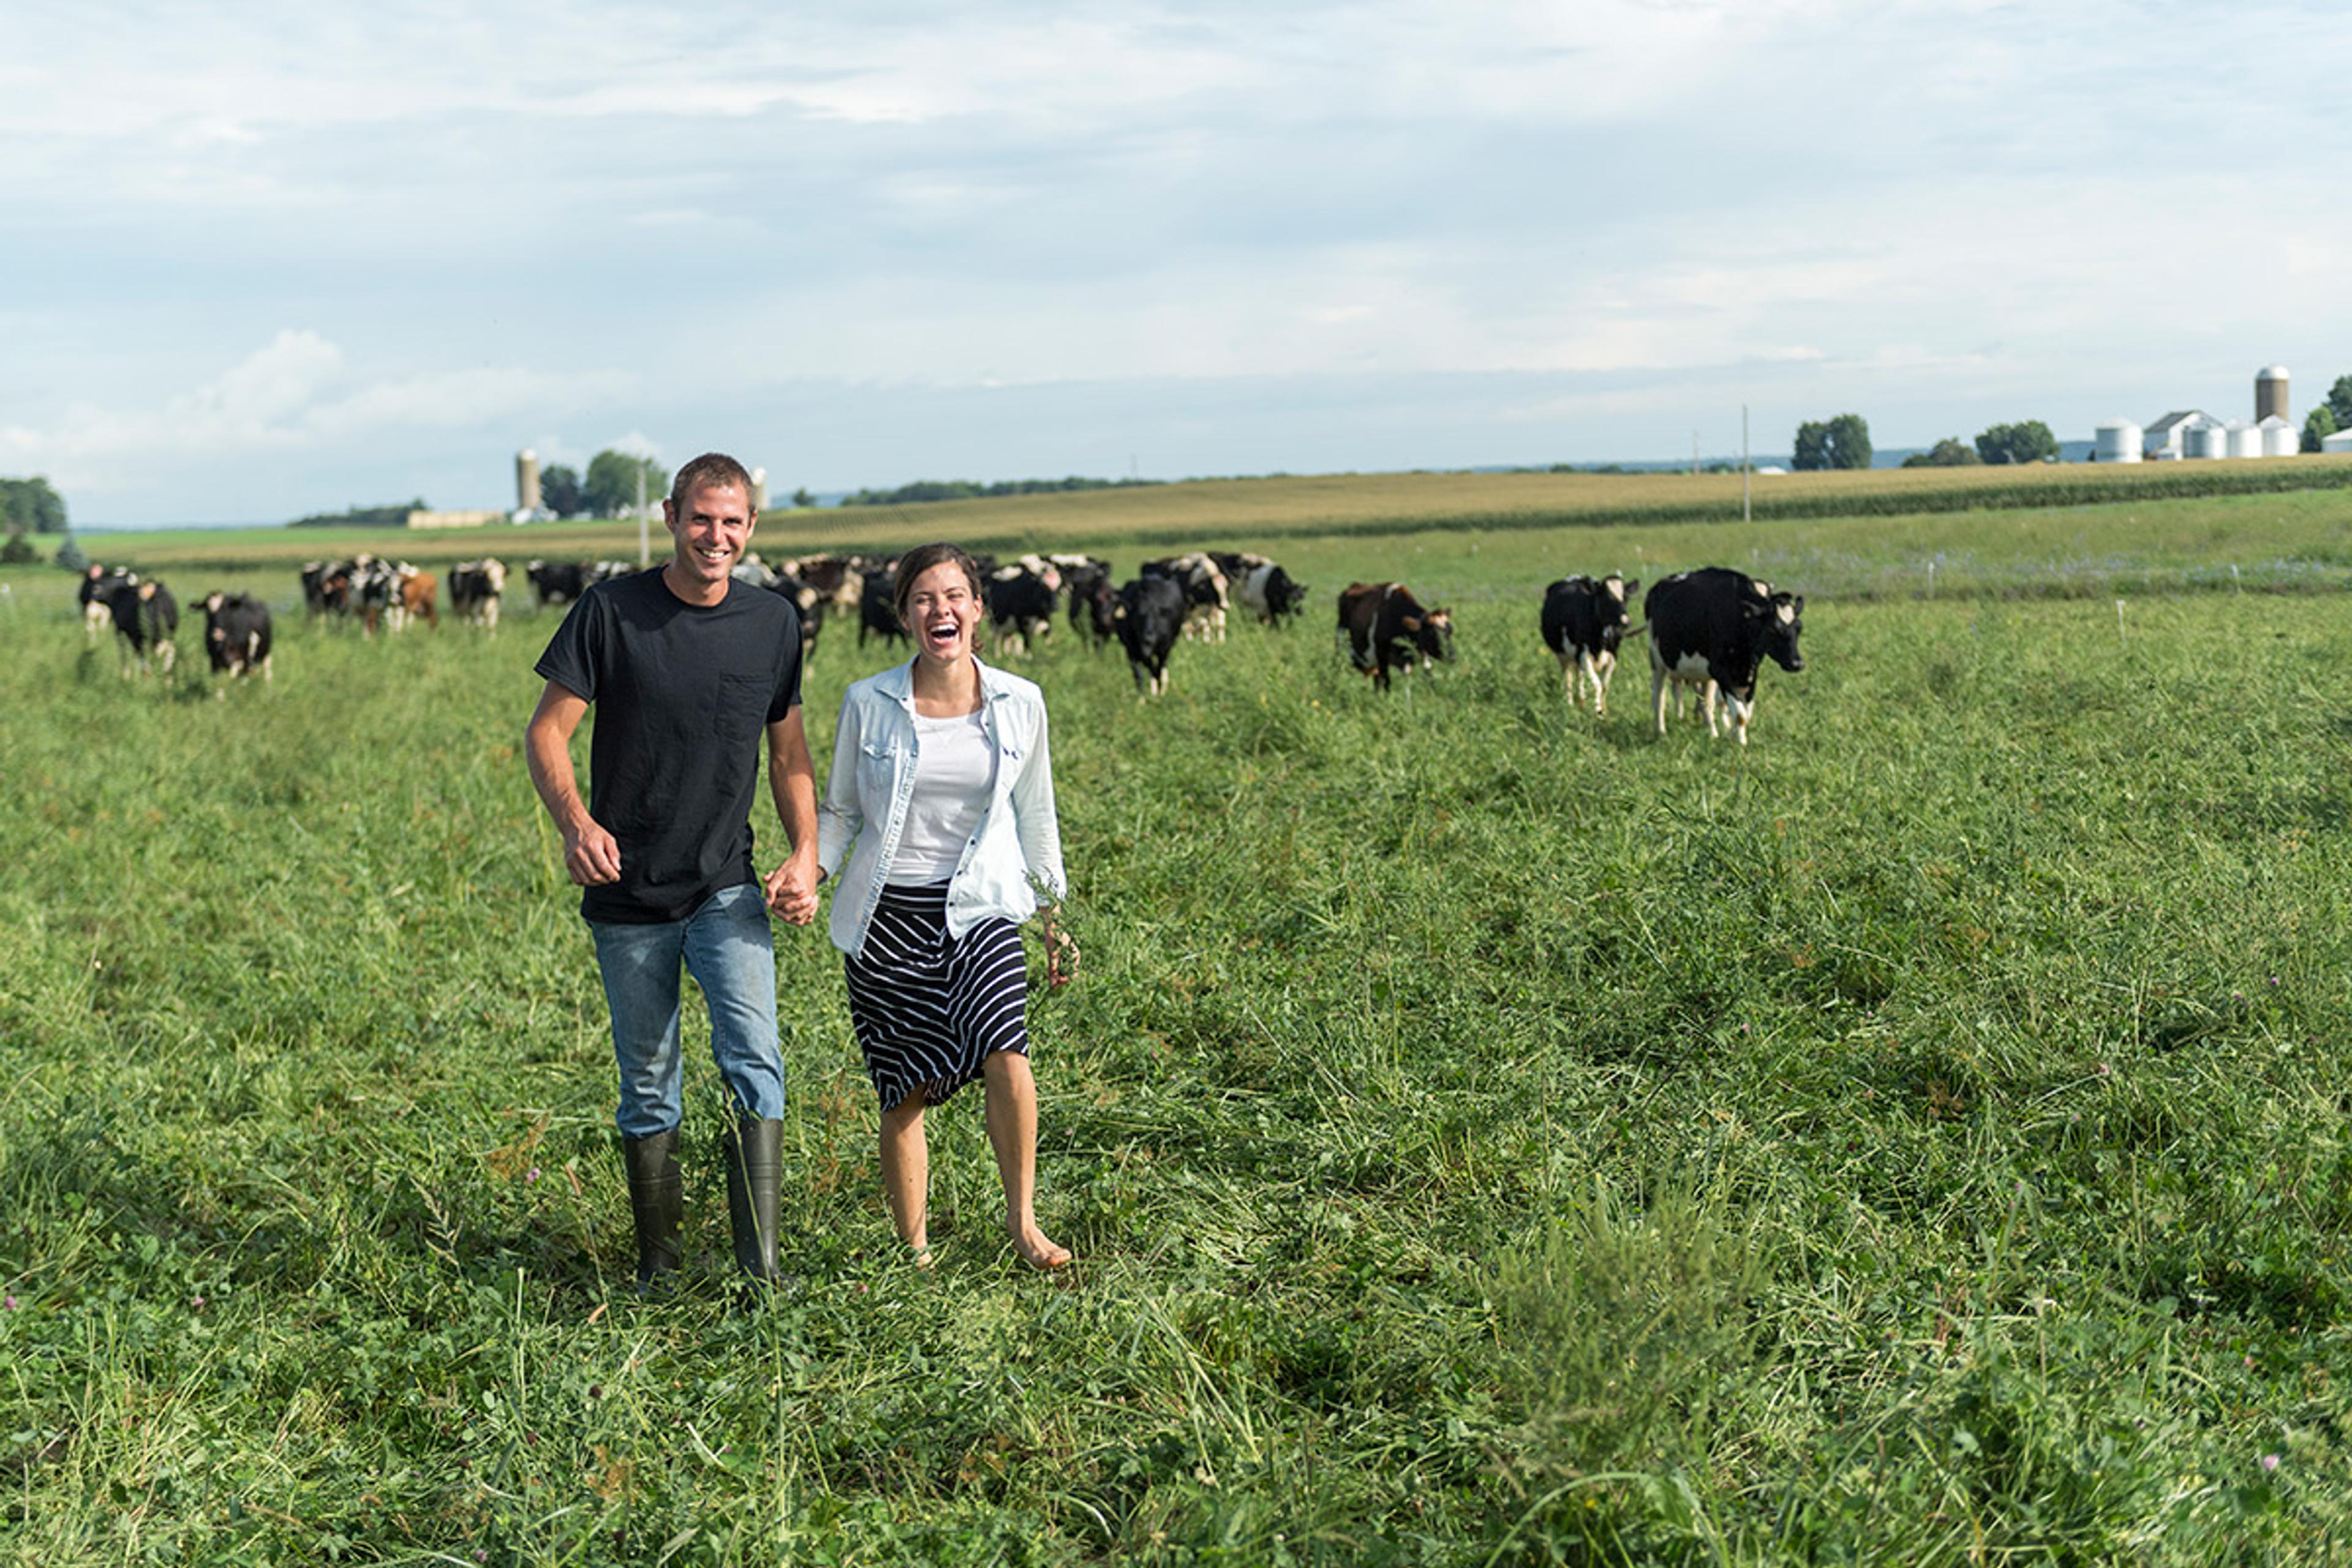 A man and woman laugh and hold hands while walking in a pasture with cows behind them.